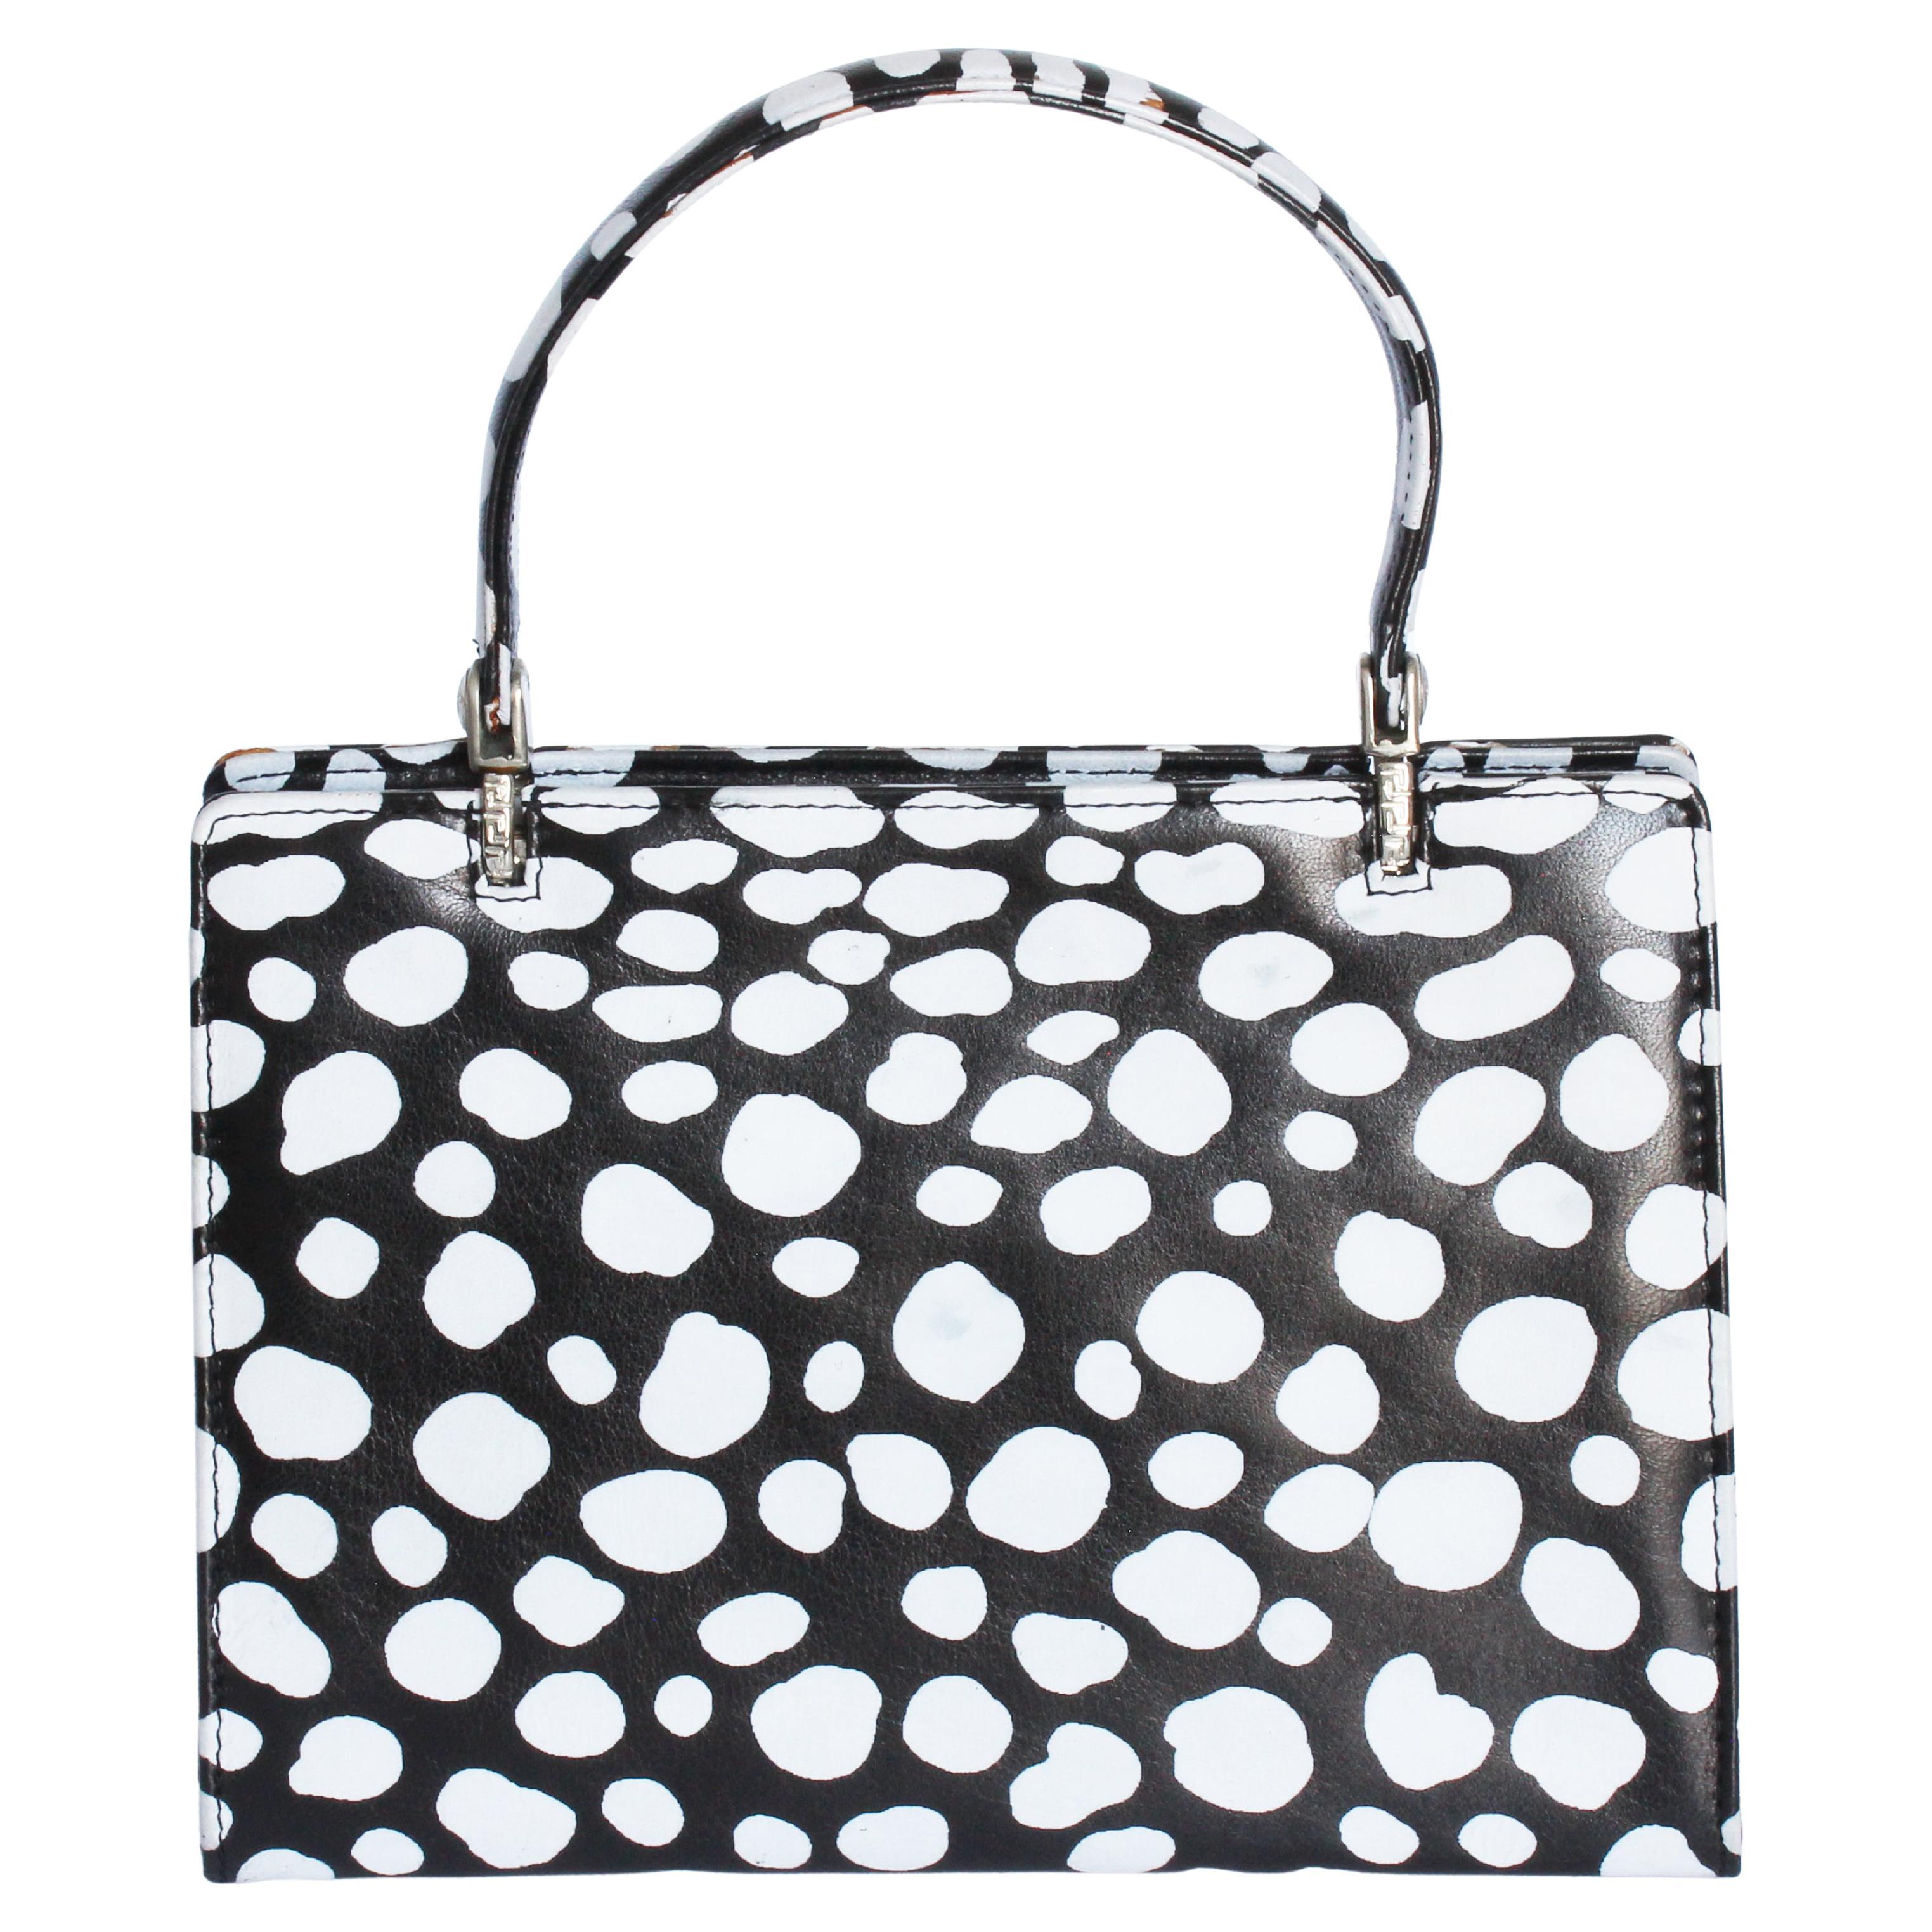 Gianni Versace Couture Handbag Top Handle Black White Abstract Dots Vintage 90s